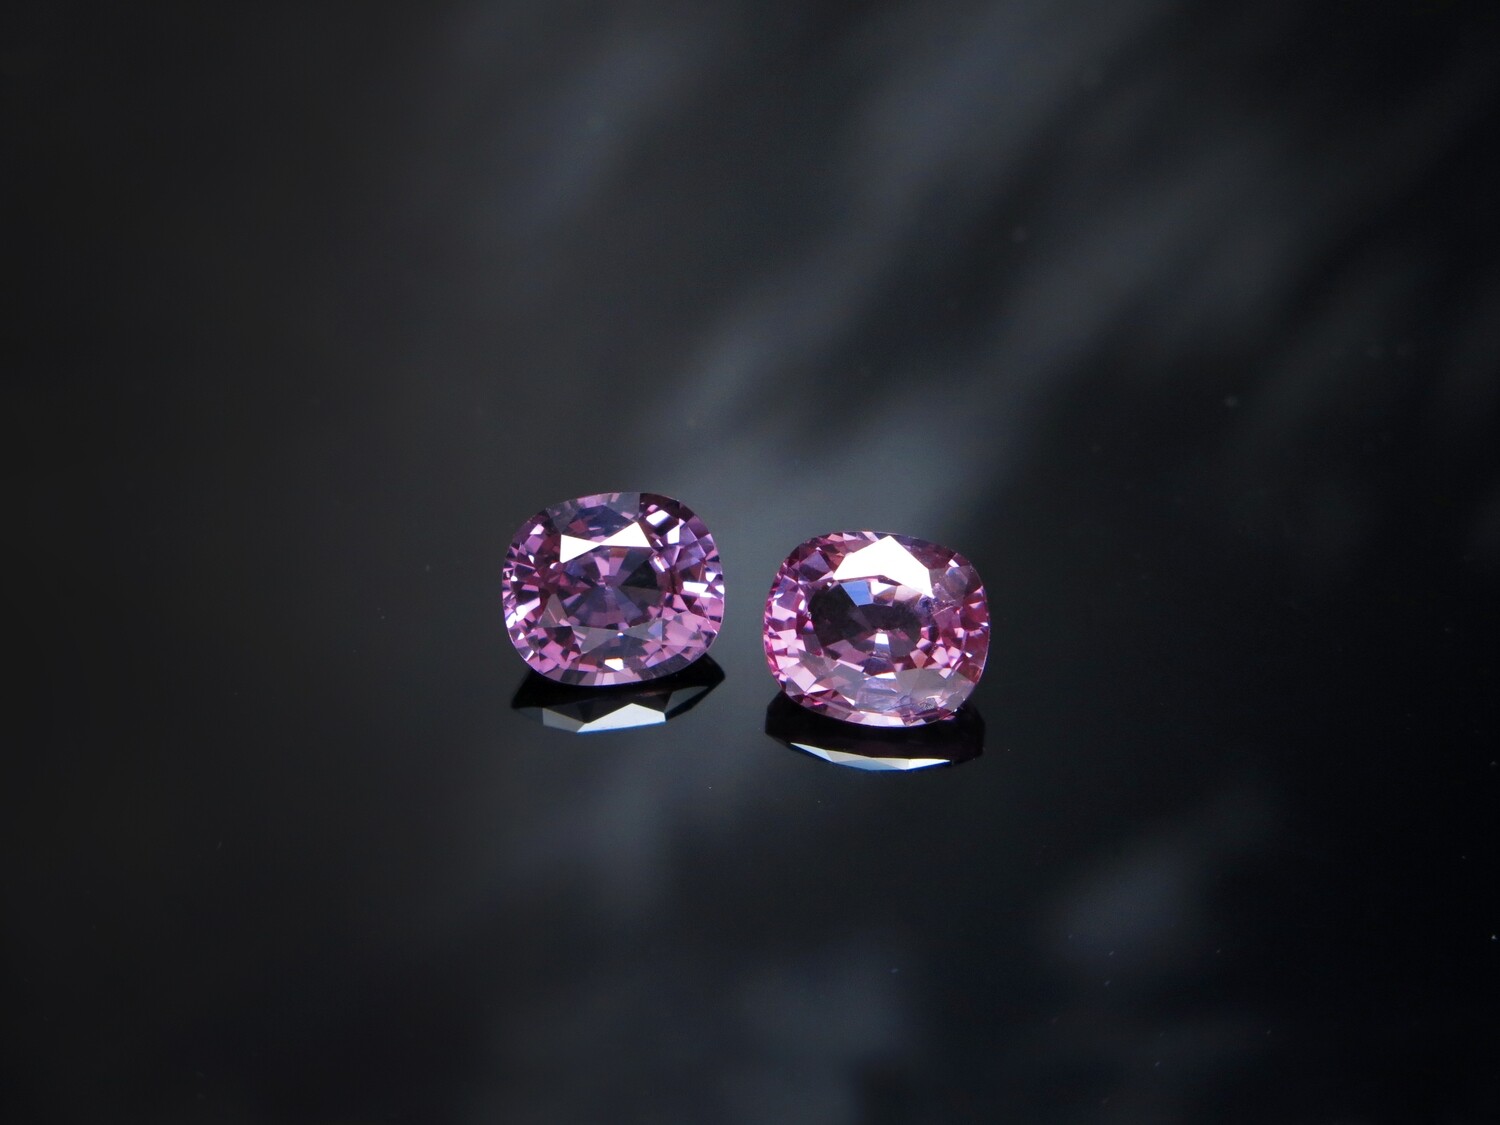 Spinel Cushion cut pair 1.11 ct and 1.22 ct